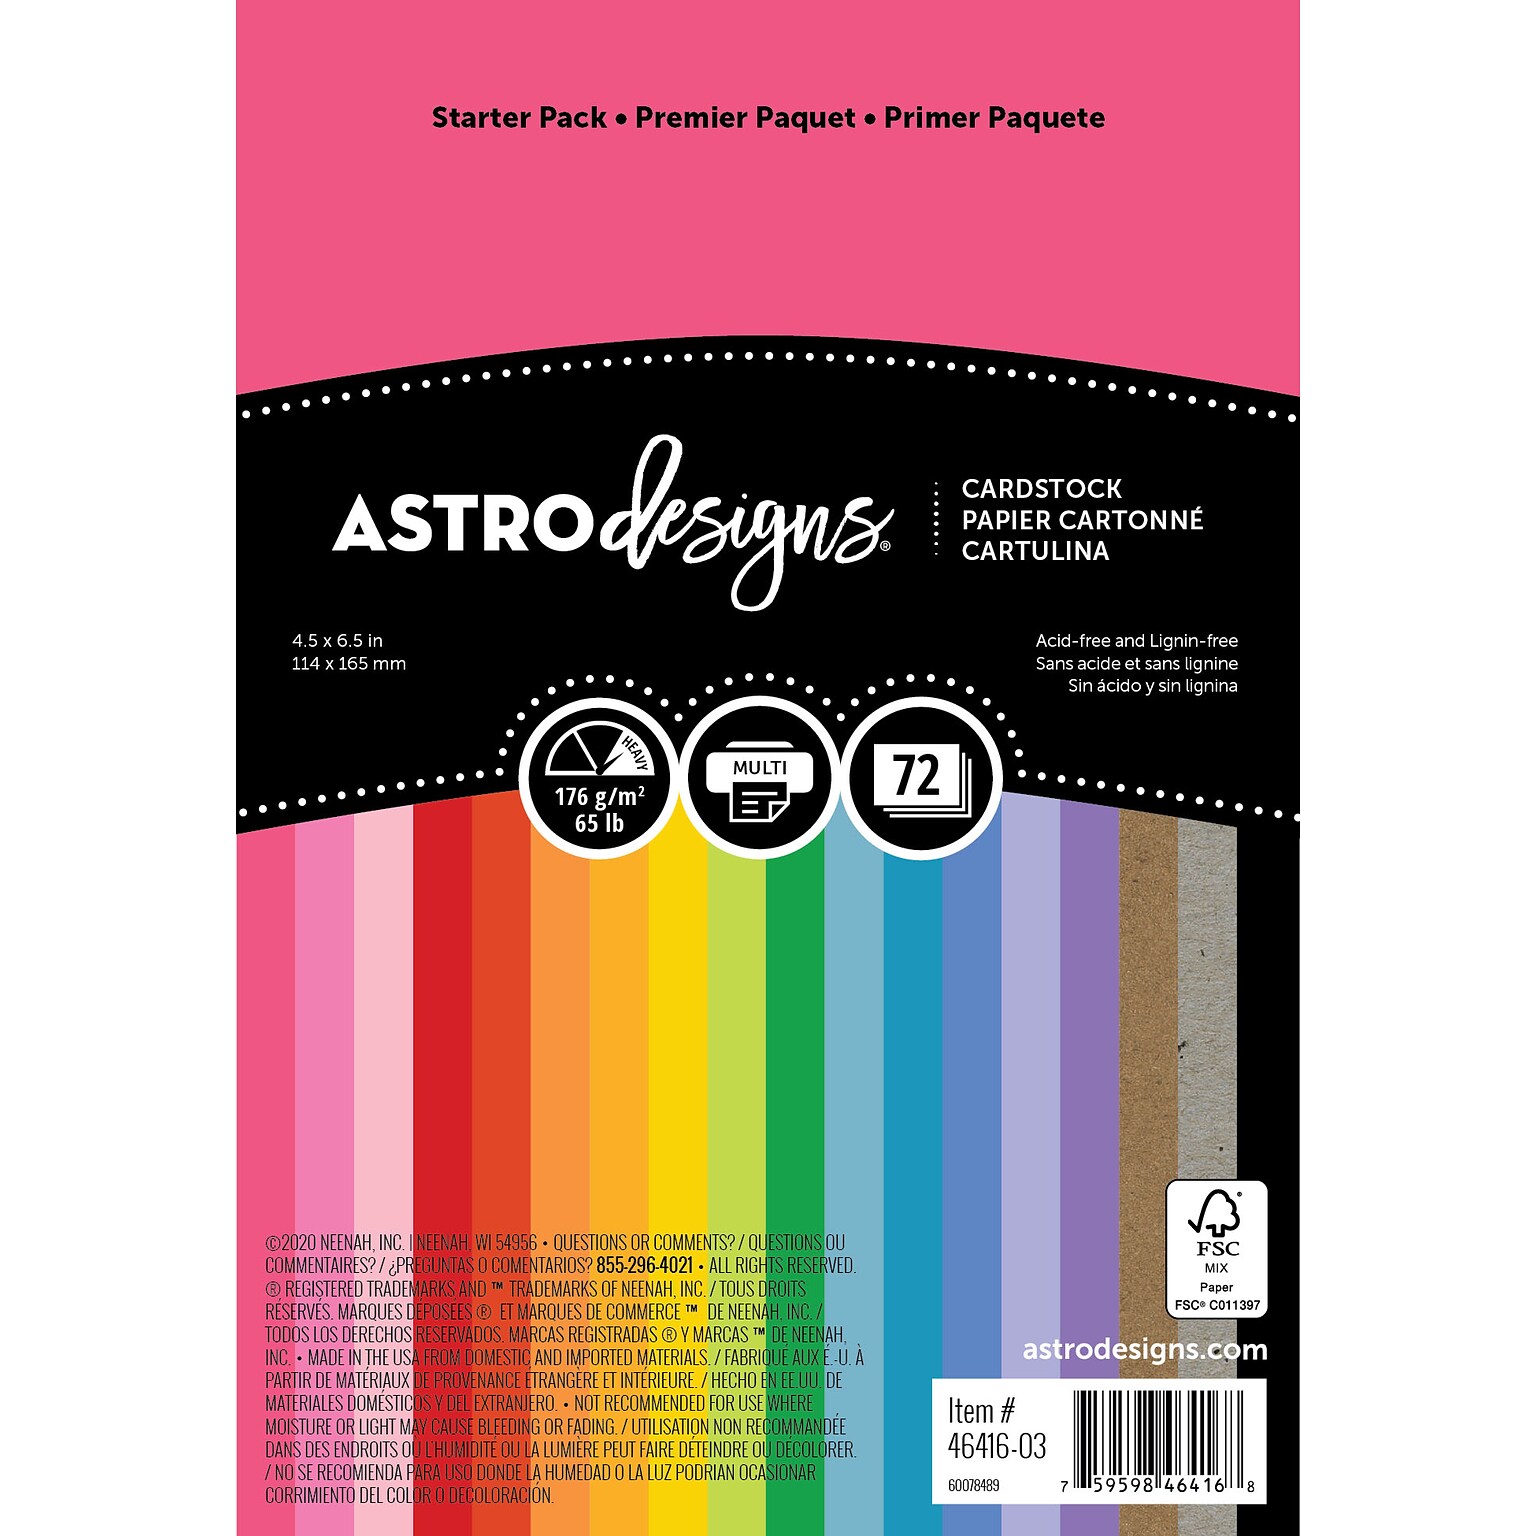 Astrodesigns 4.5 x 6.5 Cardstock Paper, 65 lbs., Assorted Colors, 72 Sheets/Pack (46416-03)